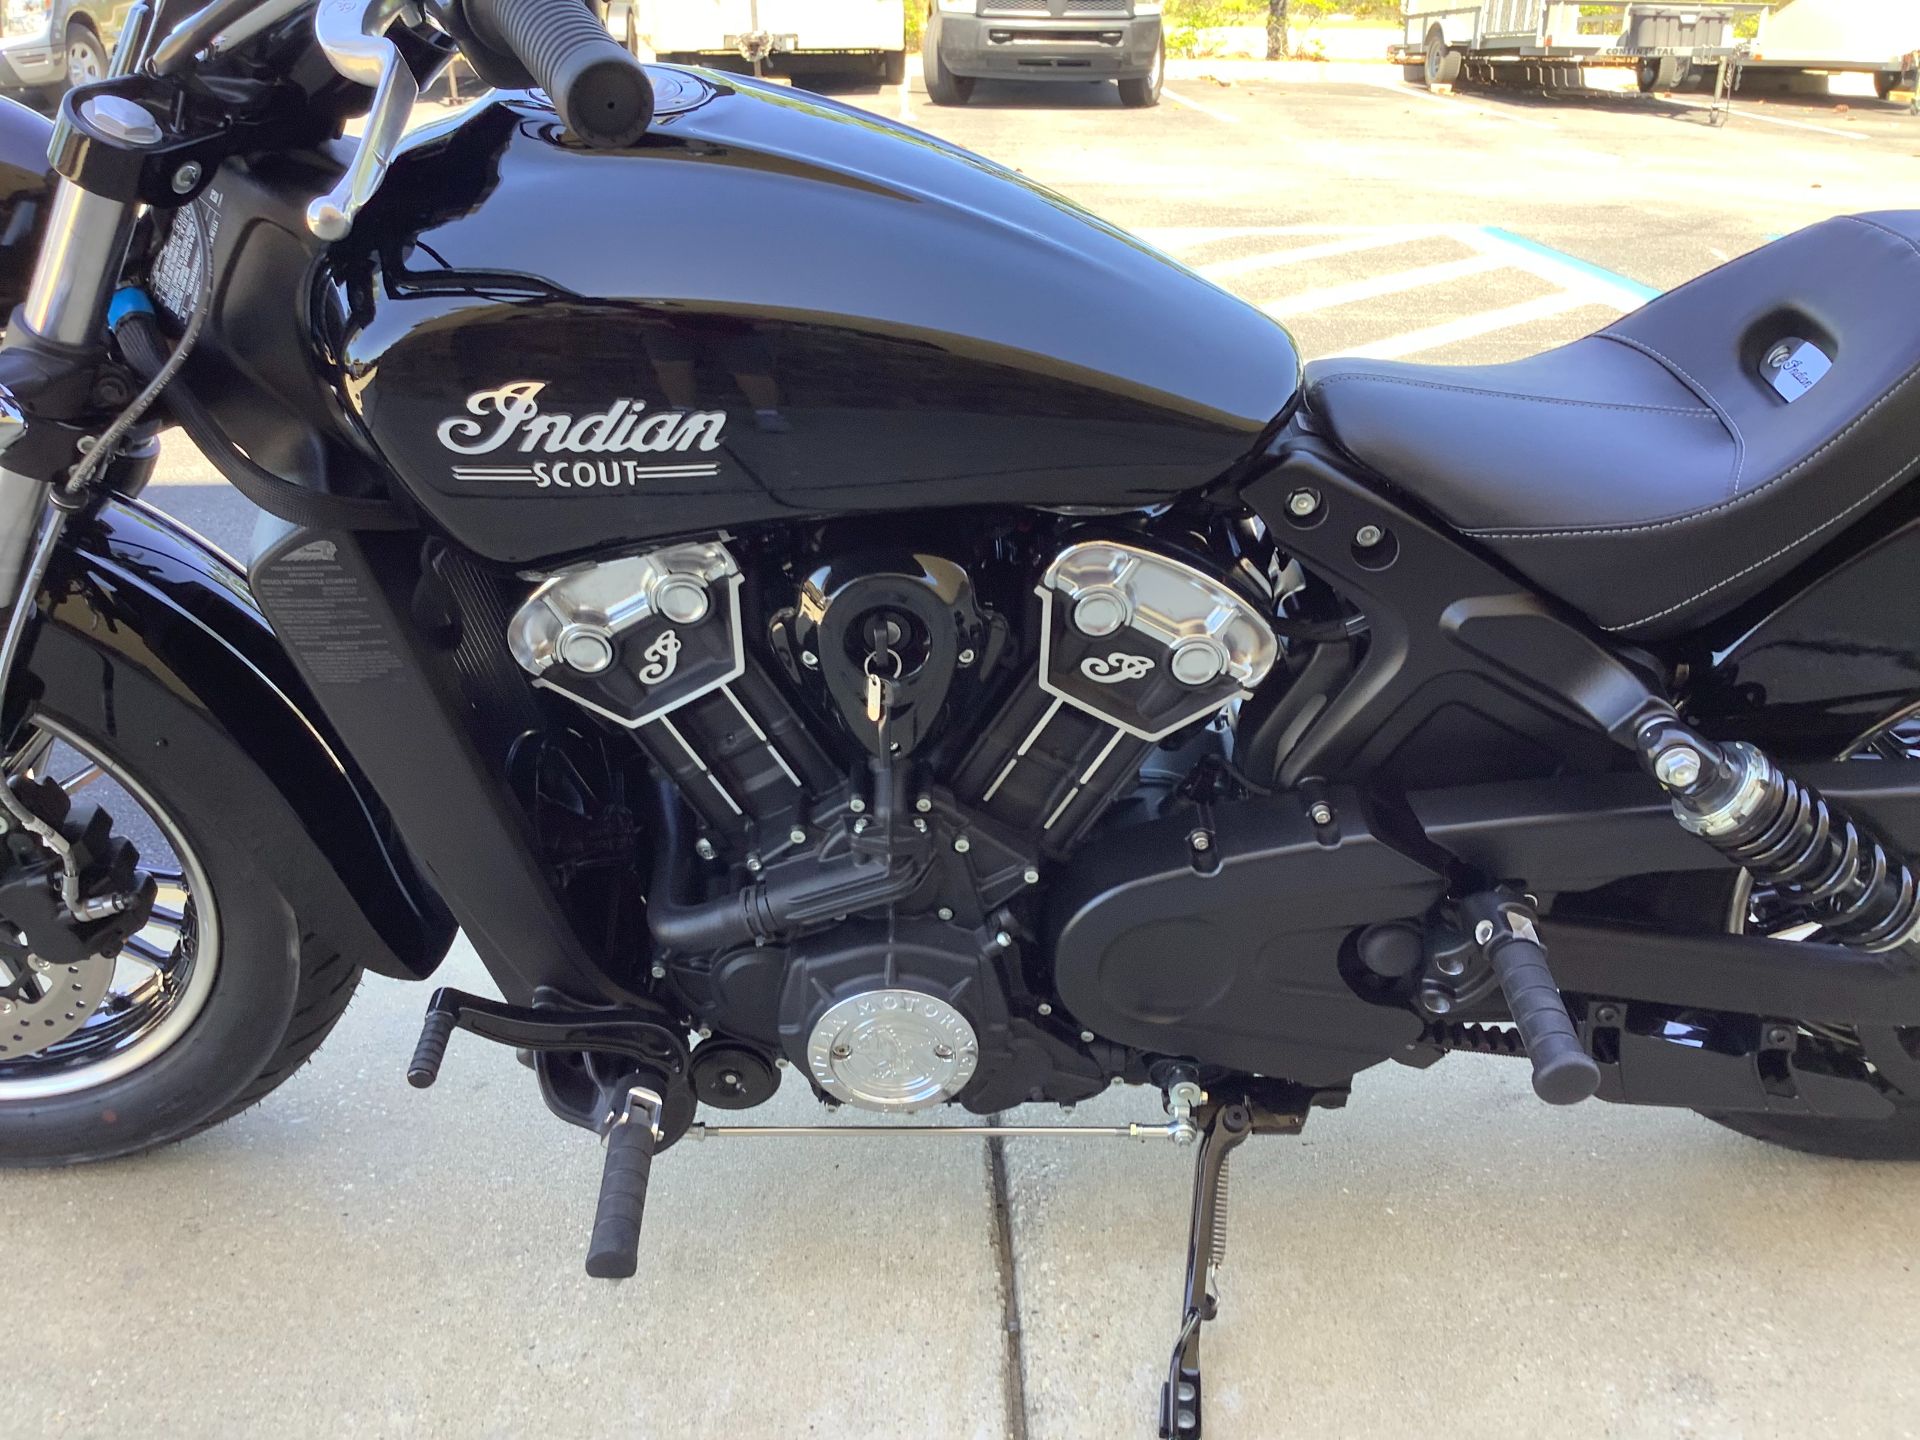 2022 Indian SCOUT NON ABS in Panama City Beach, Florida - Photo 10